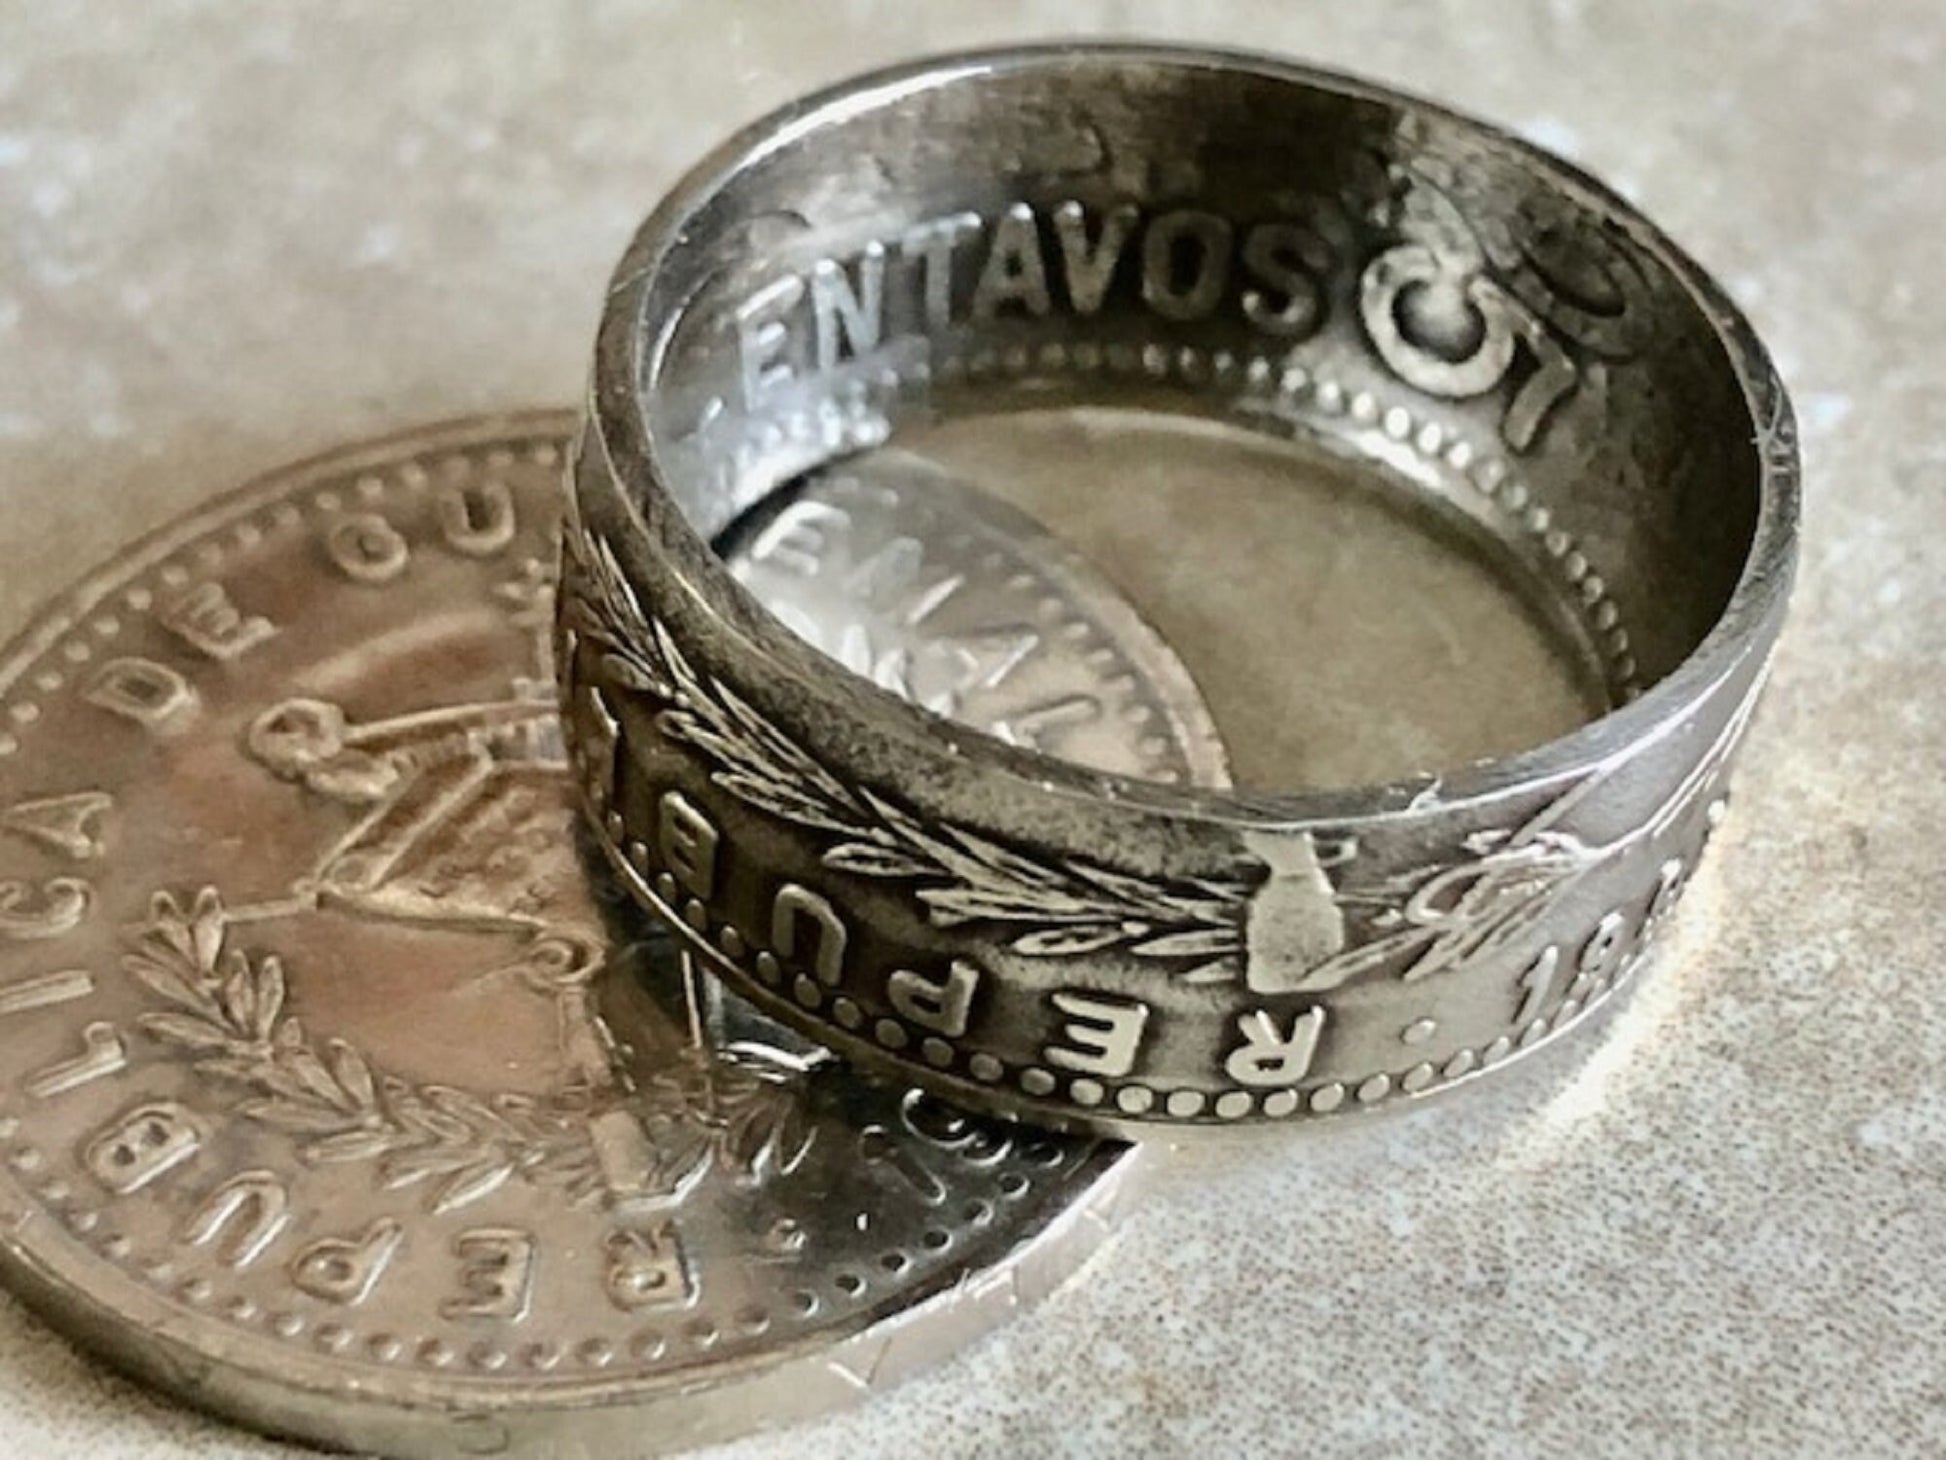 Guatemala Ring Guatemalan Coin Ring Handmade Personal Jewelry Ring Gift For Friend Coin Ring Gift For Him Her World Coin Collector